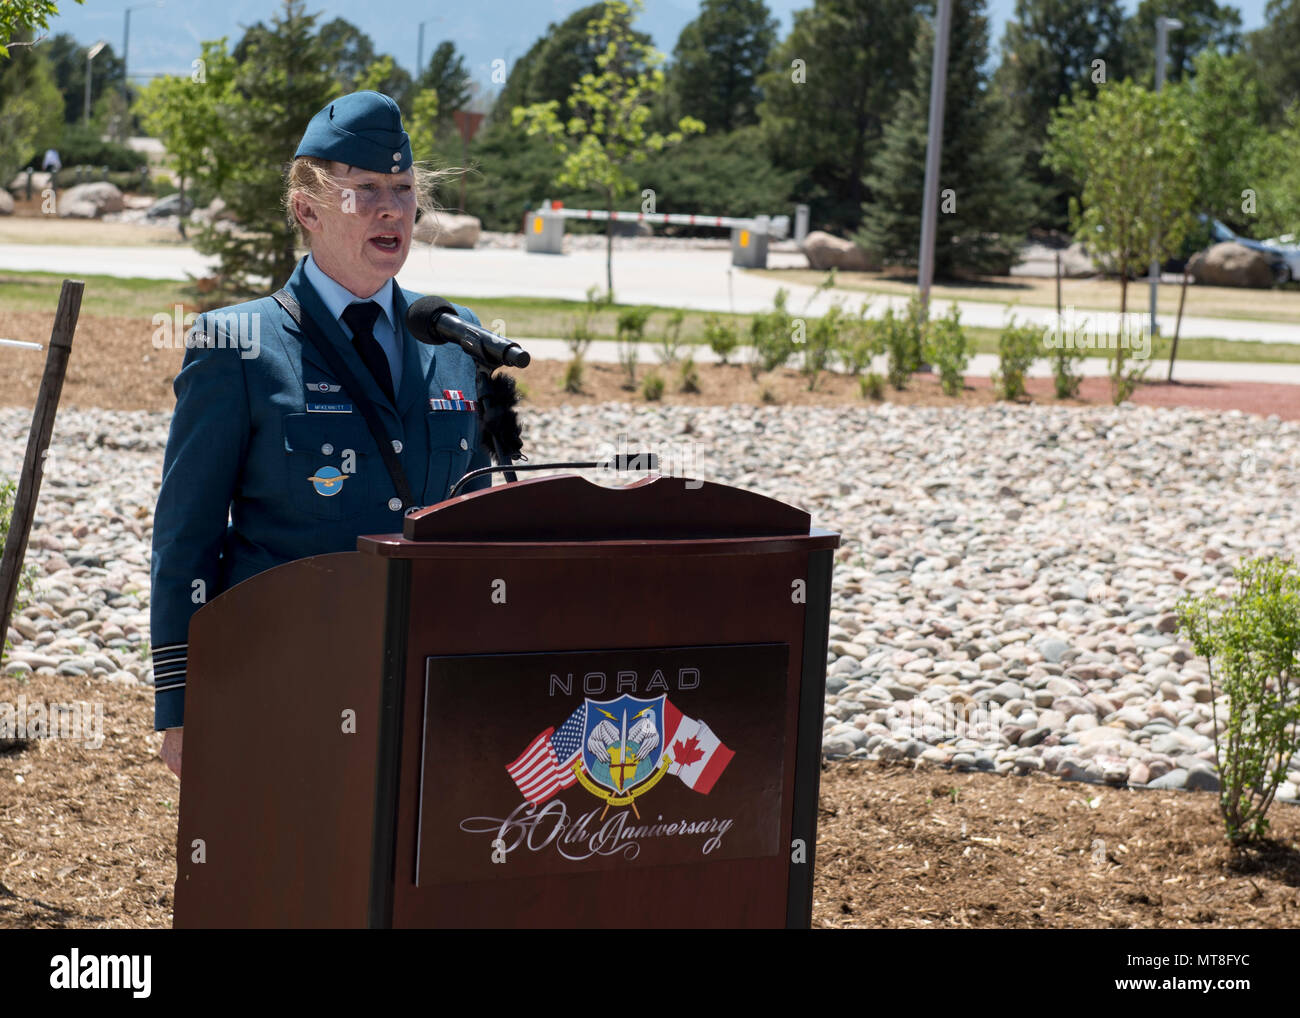 Royal Canadian Air Force Honorary Colonel Loreena McKennitt sings the Canadian and U.S. National Anthems during  the unveiling ceremony for a memorial cairn outside the NORAD and USNORTHCOM headquarters building on Peterson Air Force Base, Colorado, May 11. The cairn honors the Canadian service men and women who passed away while serving at NORAD in Colorado Springs. The placement and dedication of the cairn was conducted in conjunction with the 60th Anniversary of NORAD and the U.S. Canadian binational NORAD agreement. (DoD Photo By N&NC Public Affairs) Stock Photo